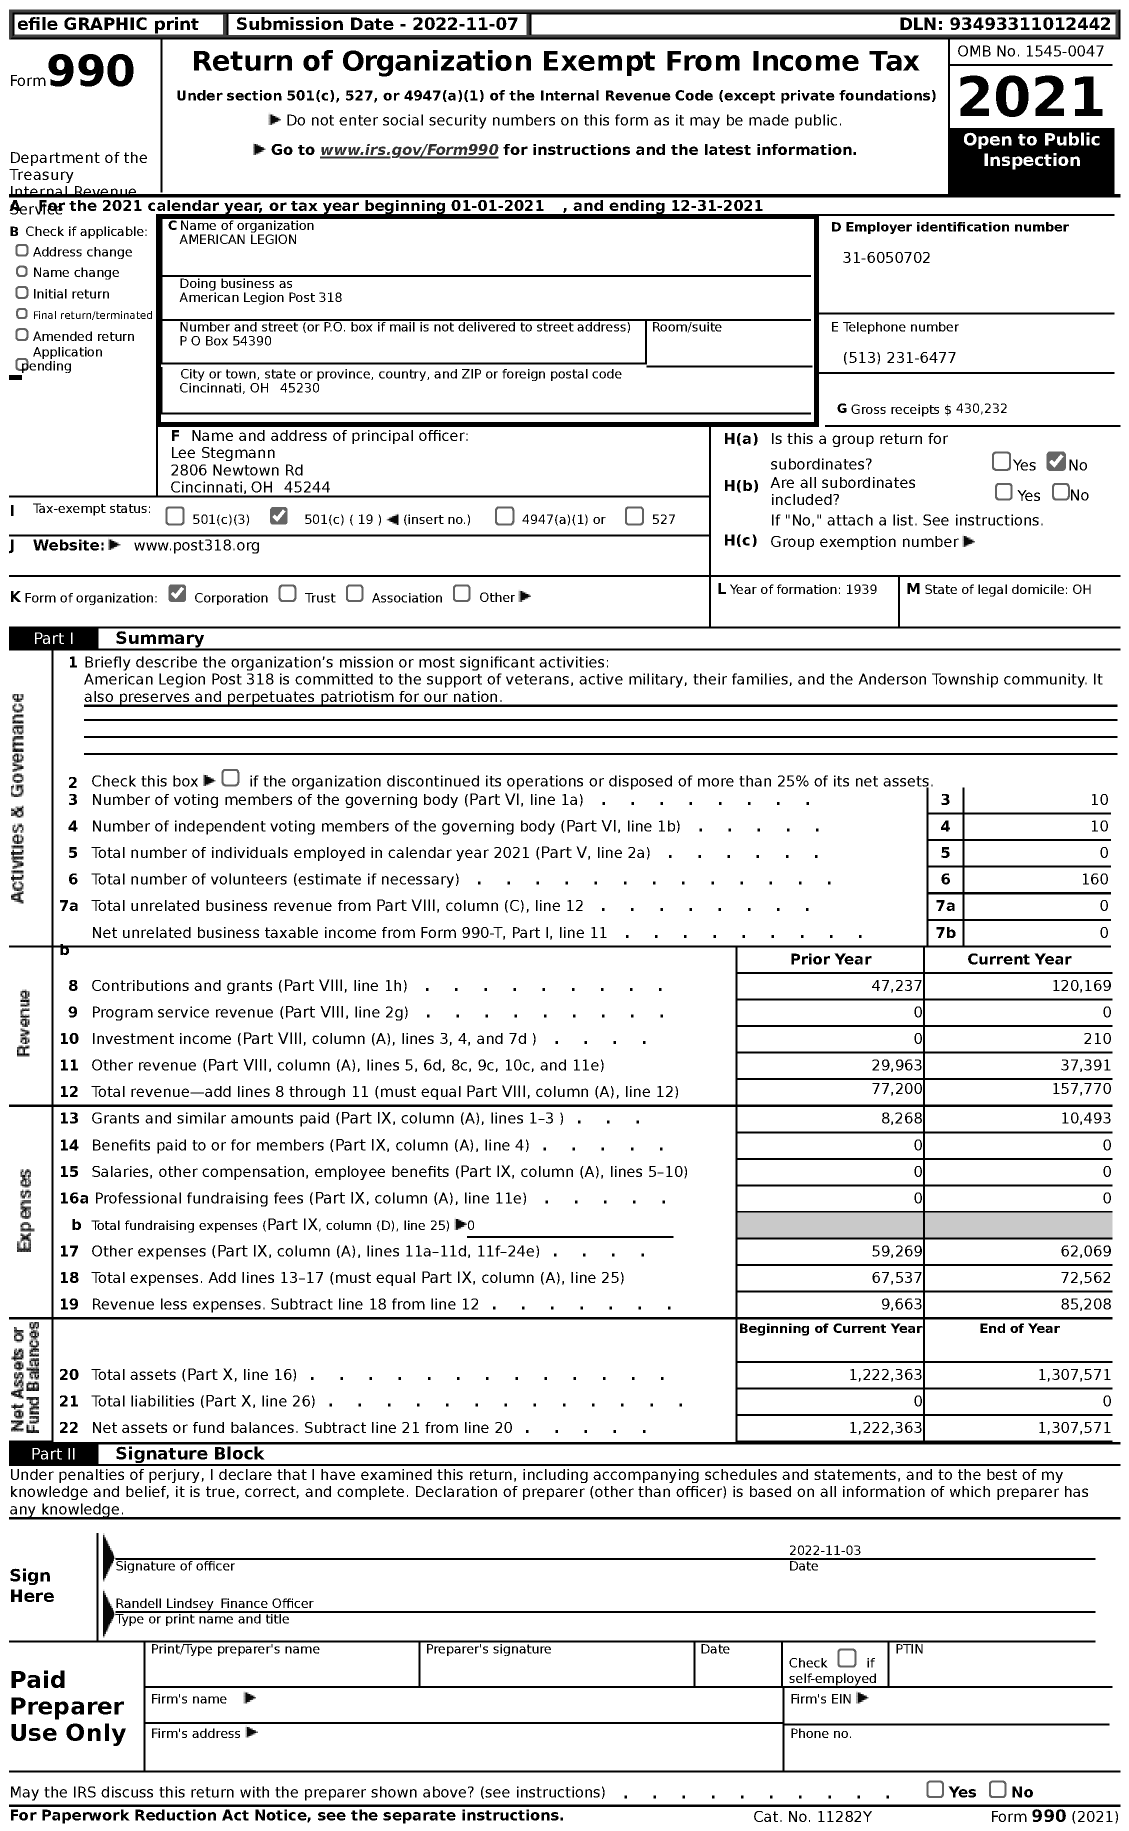 Image of first page of 2021 Form 990 for AMERICAN Legion - AMERICAN Legion Post 318